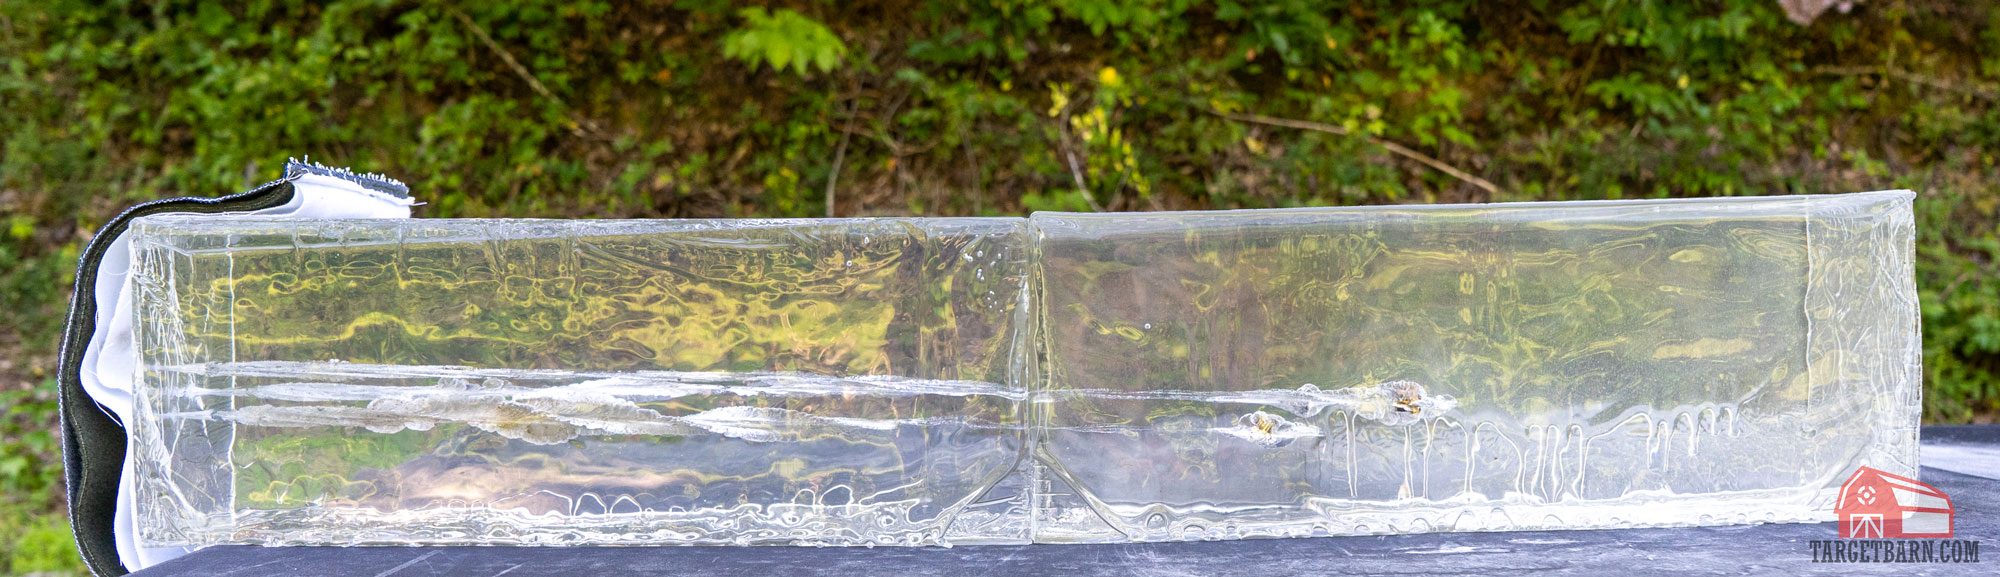 a ballistic gel block after three rounds of fiocchi defense 9mm 115 grain JHP that penetrated between 20" and 24"